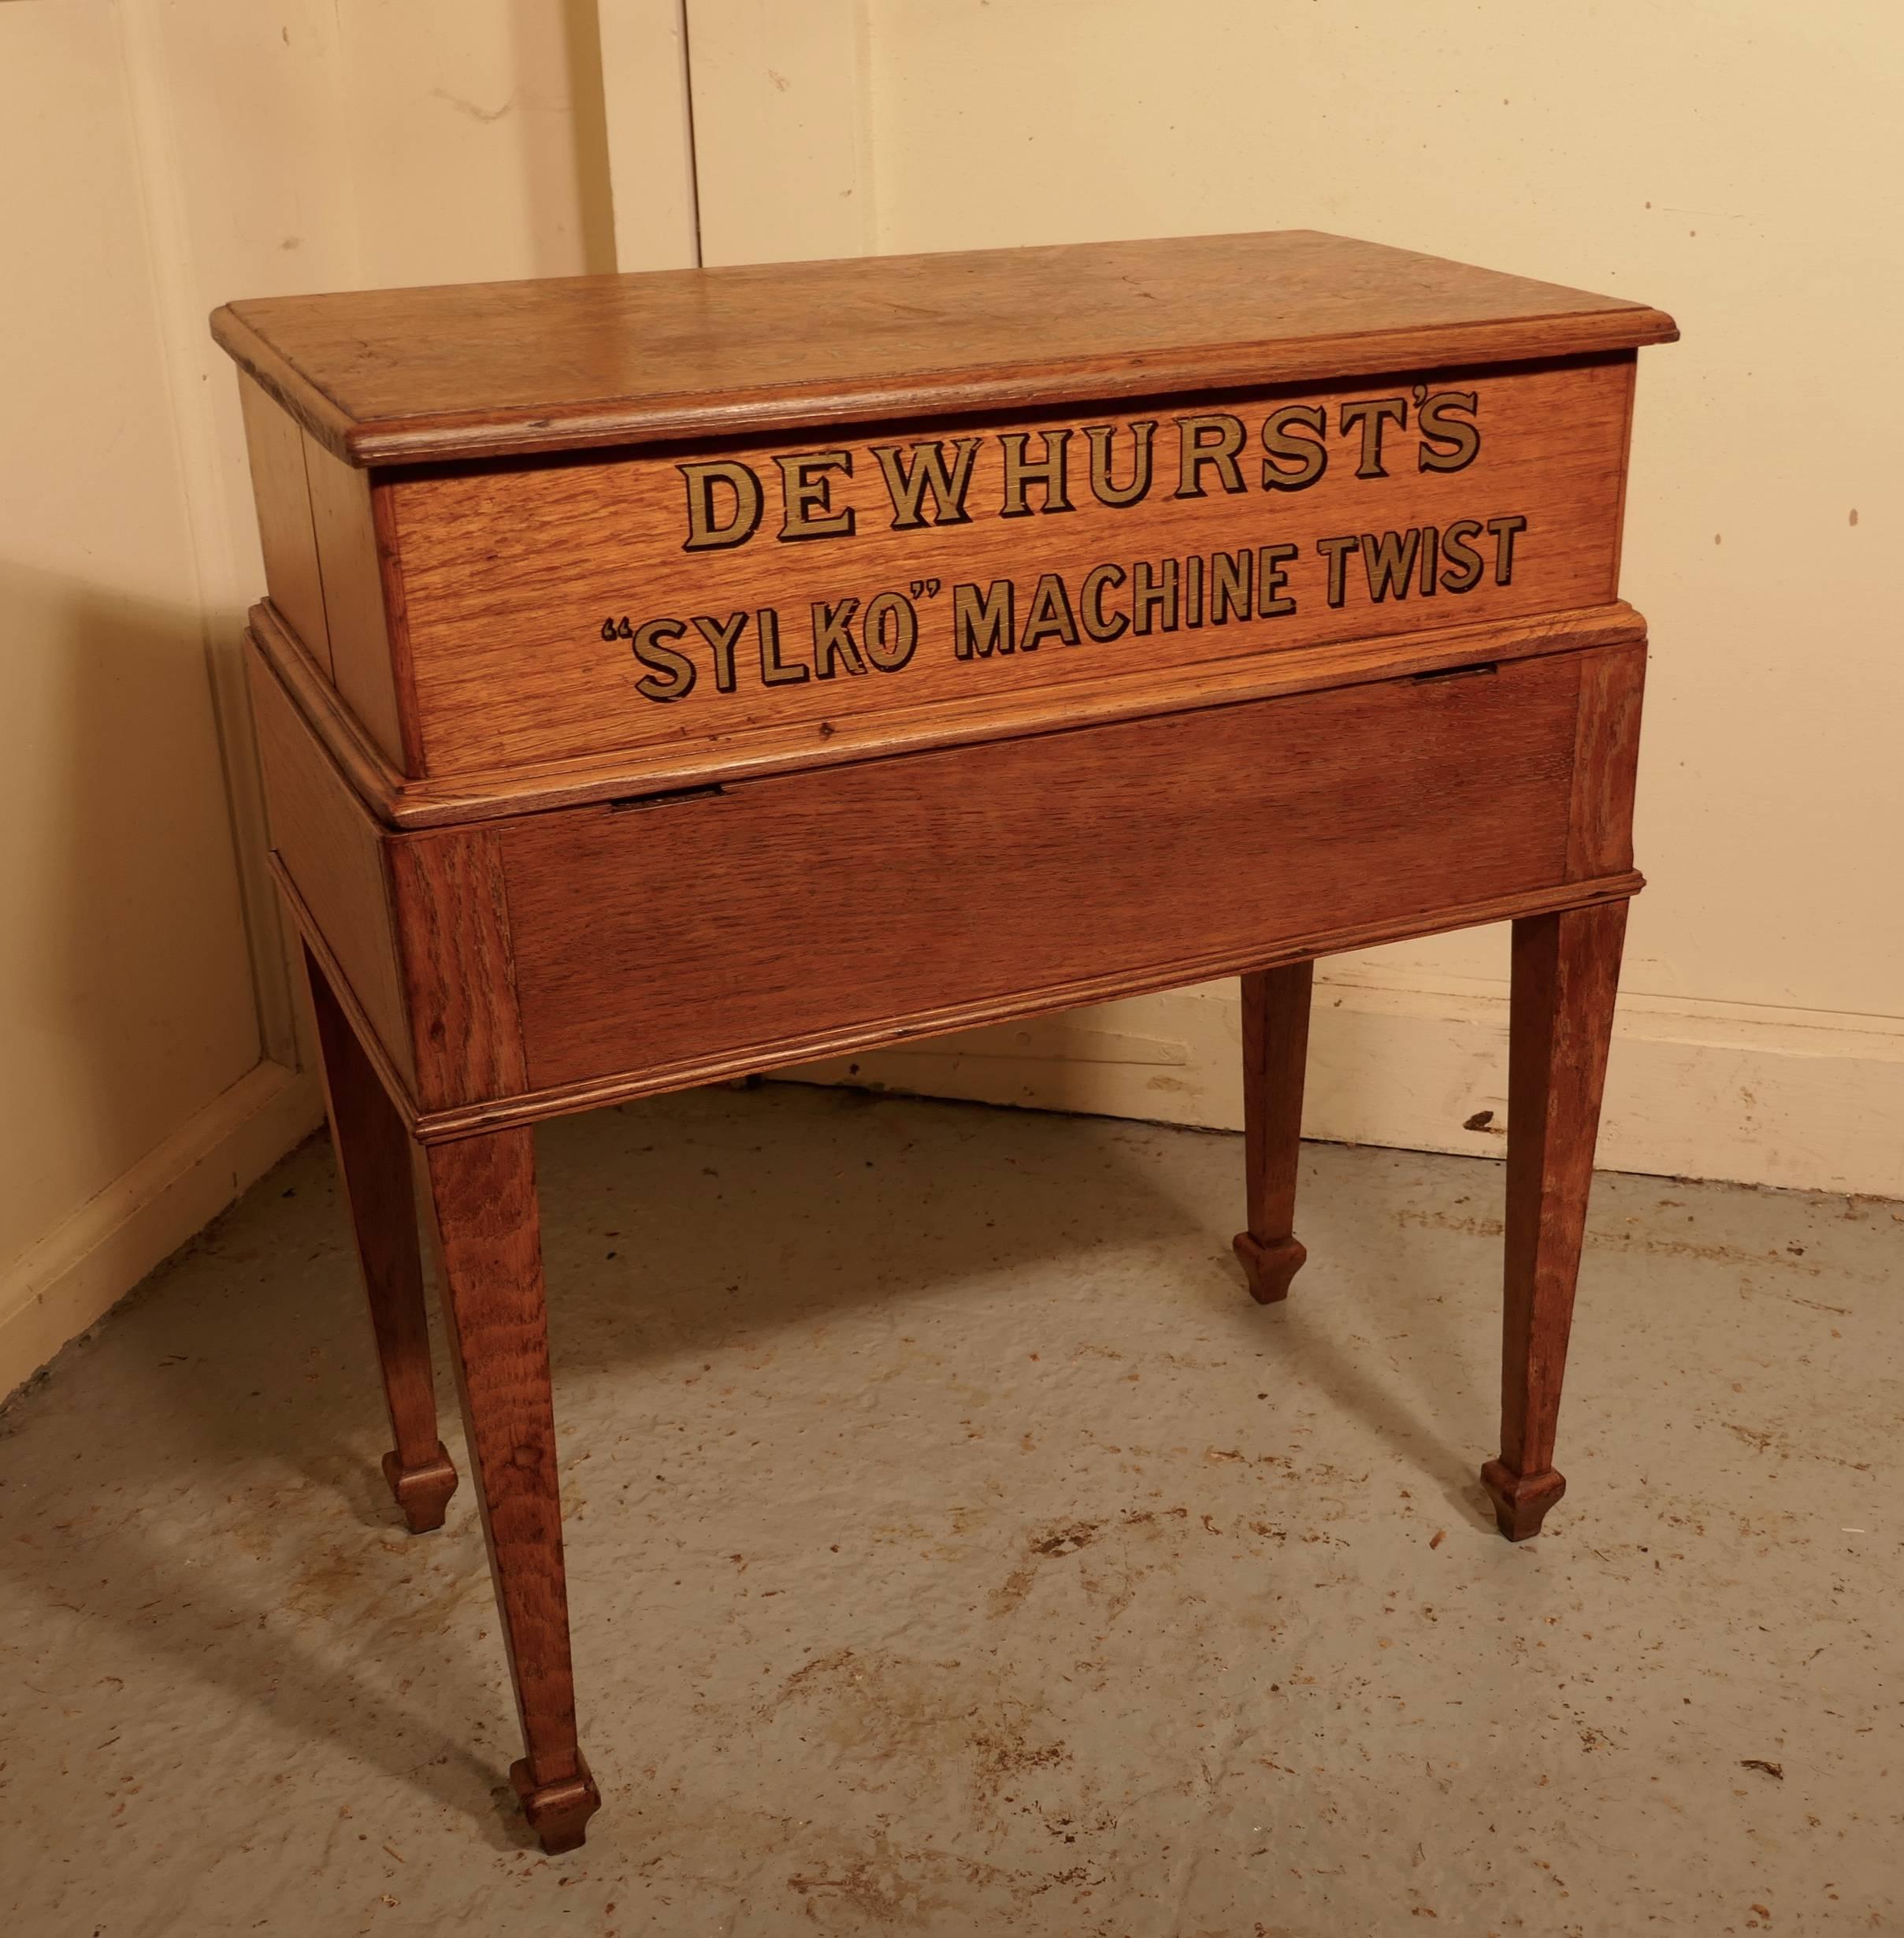 Dewhurst’s Sylko Machine Cotton Reel Haberdashery Sewing Box  

This is a pretty piece, formerly in everyday use in a Haberdashers Shop, the cabinet is set on long legs making it the ideal height for a sewing table companion
The cabinet has 2